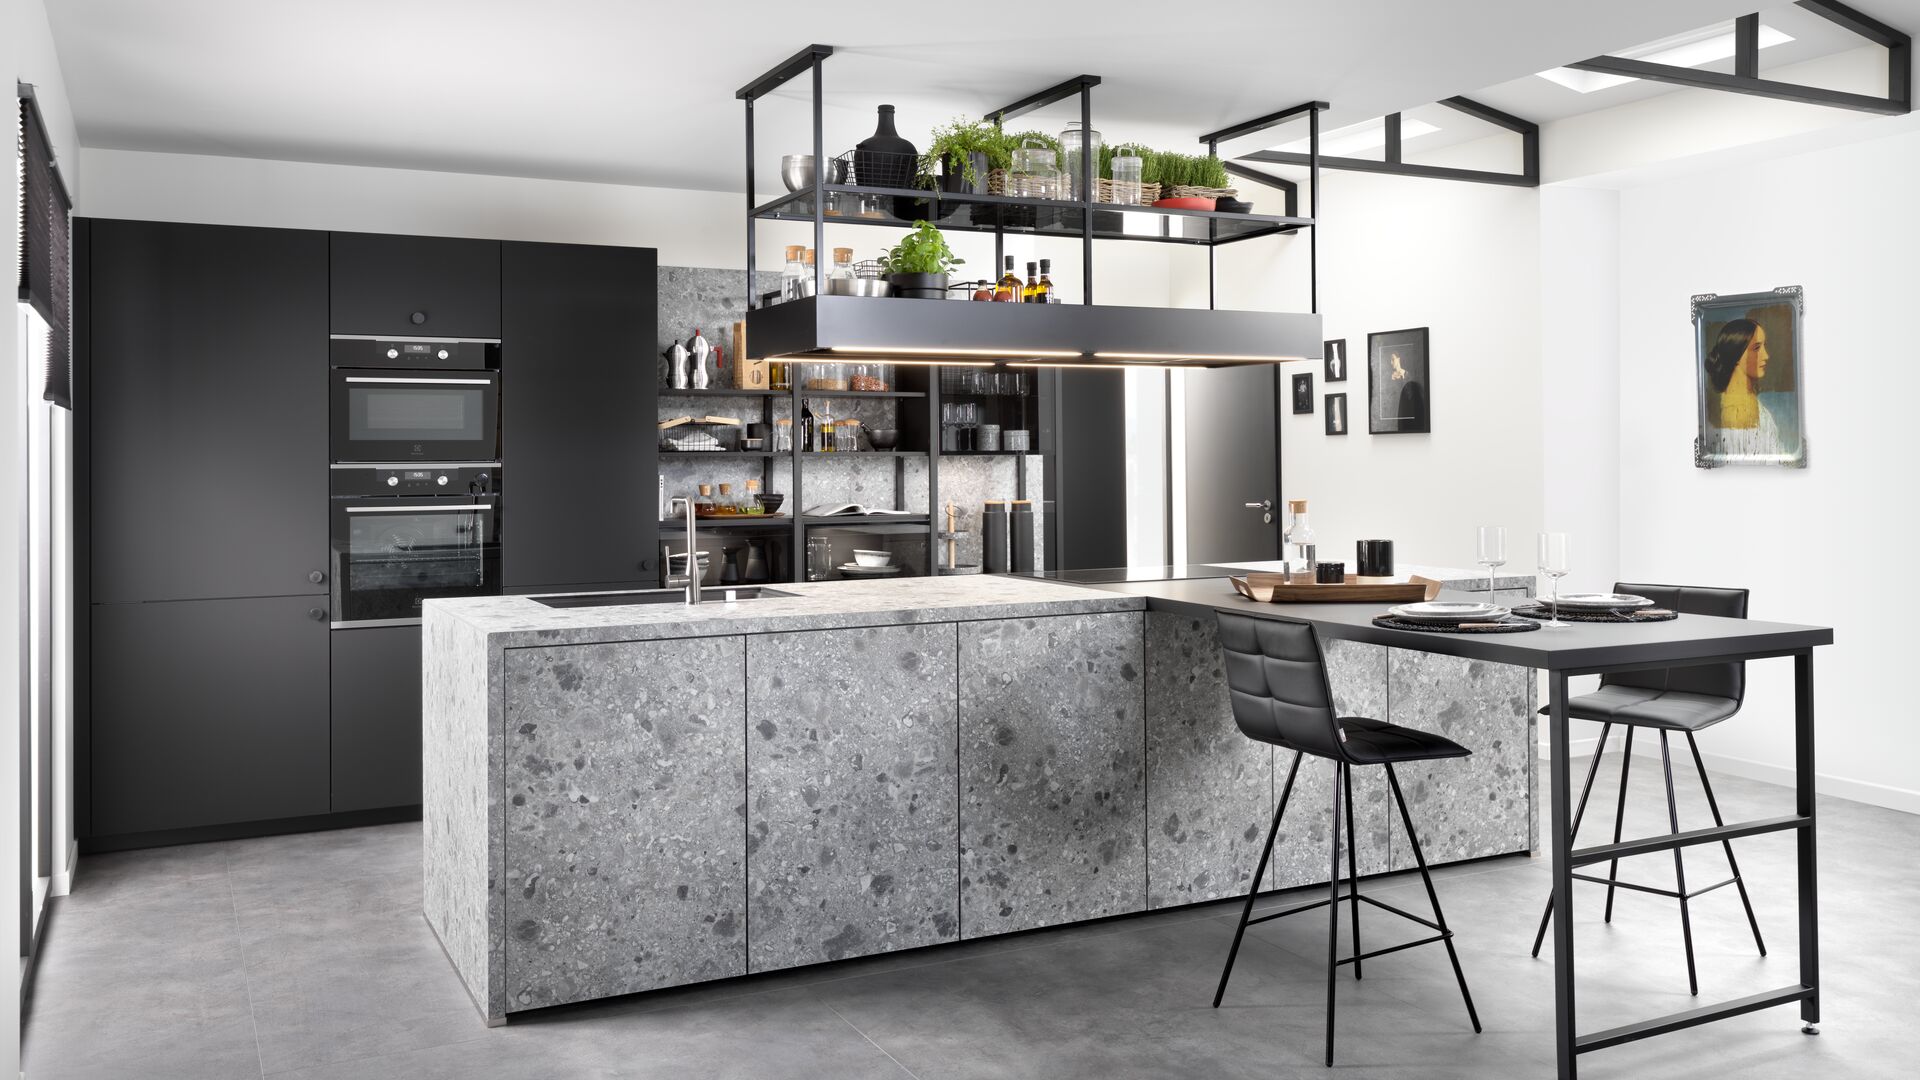 Kitchen with terrazzo-style island and black units with suspended shelves